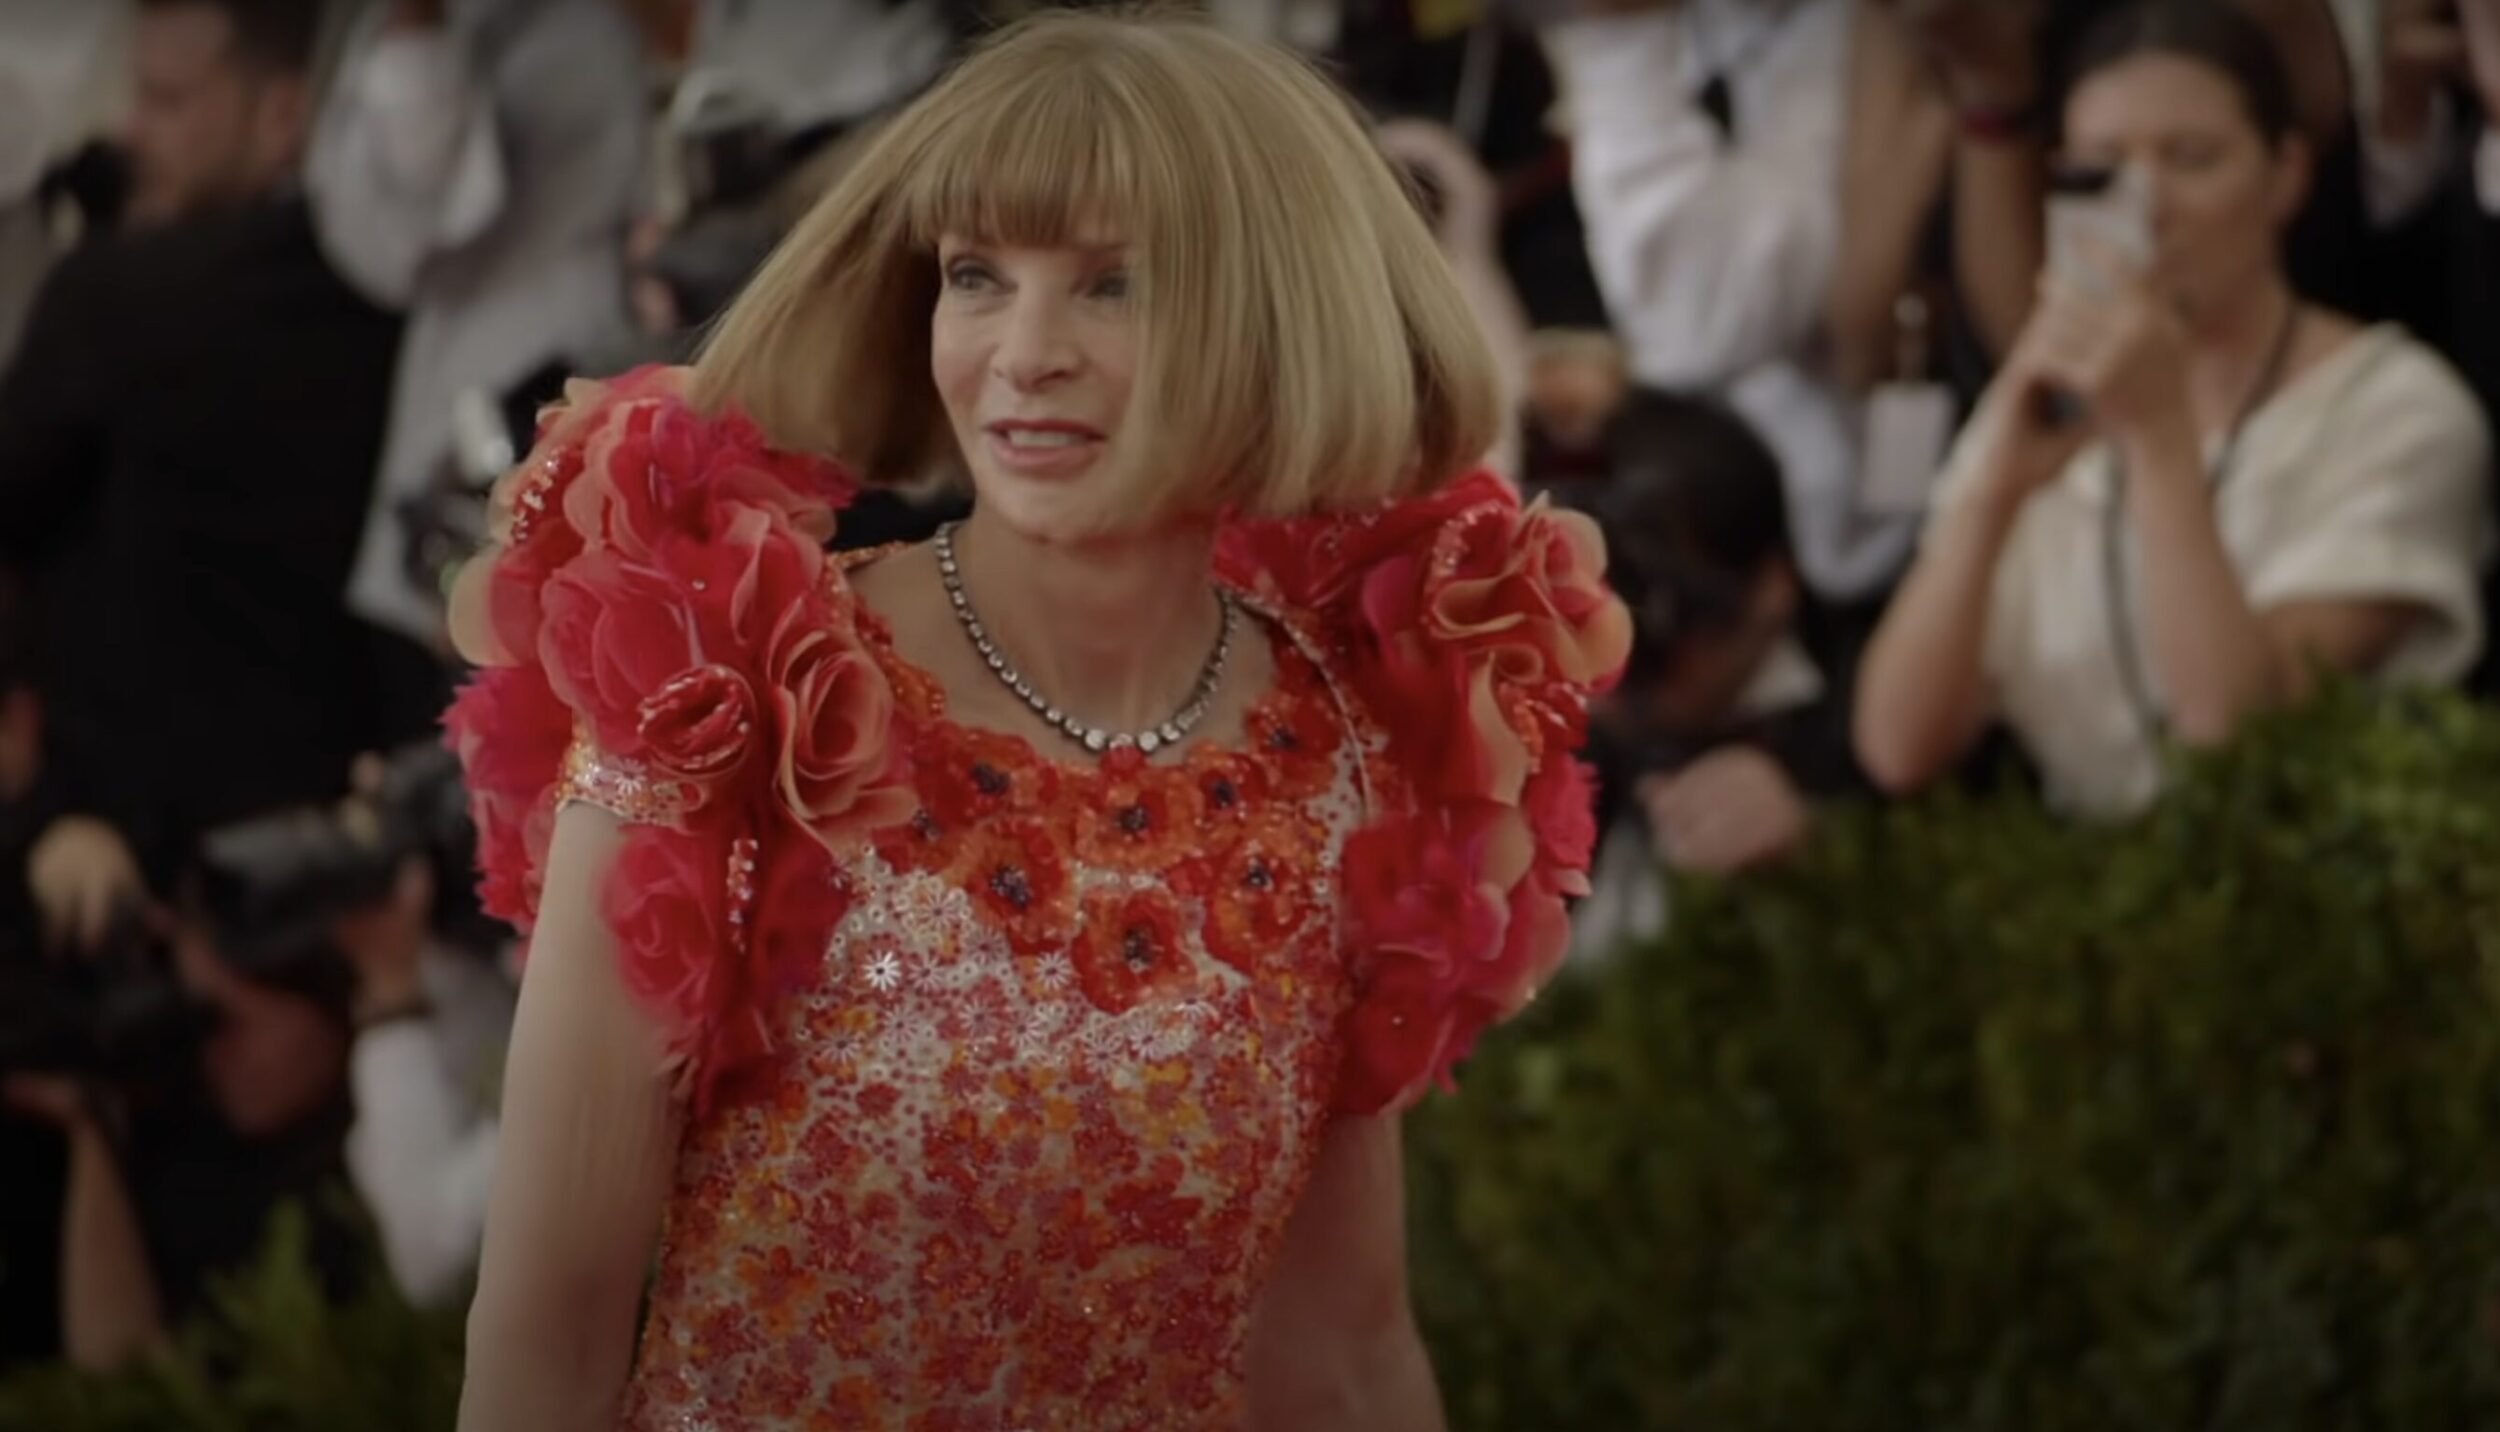 Anna Wintour au gala du Met dans le documentaire The First monday in may